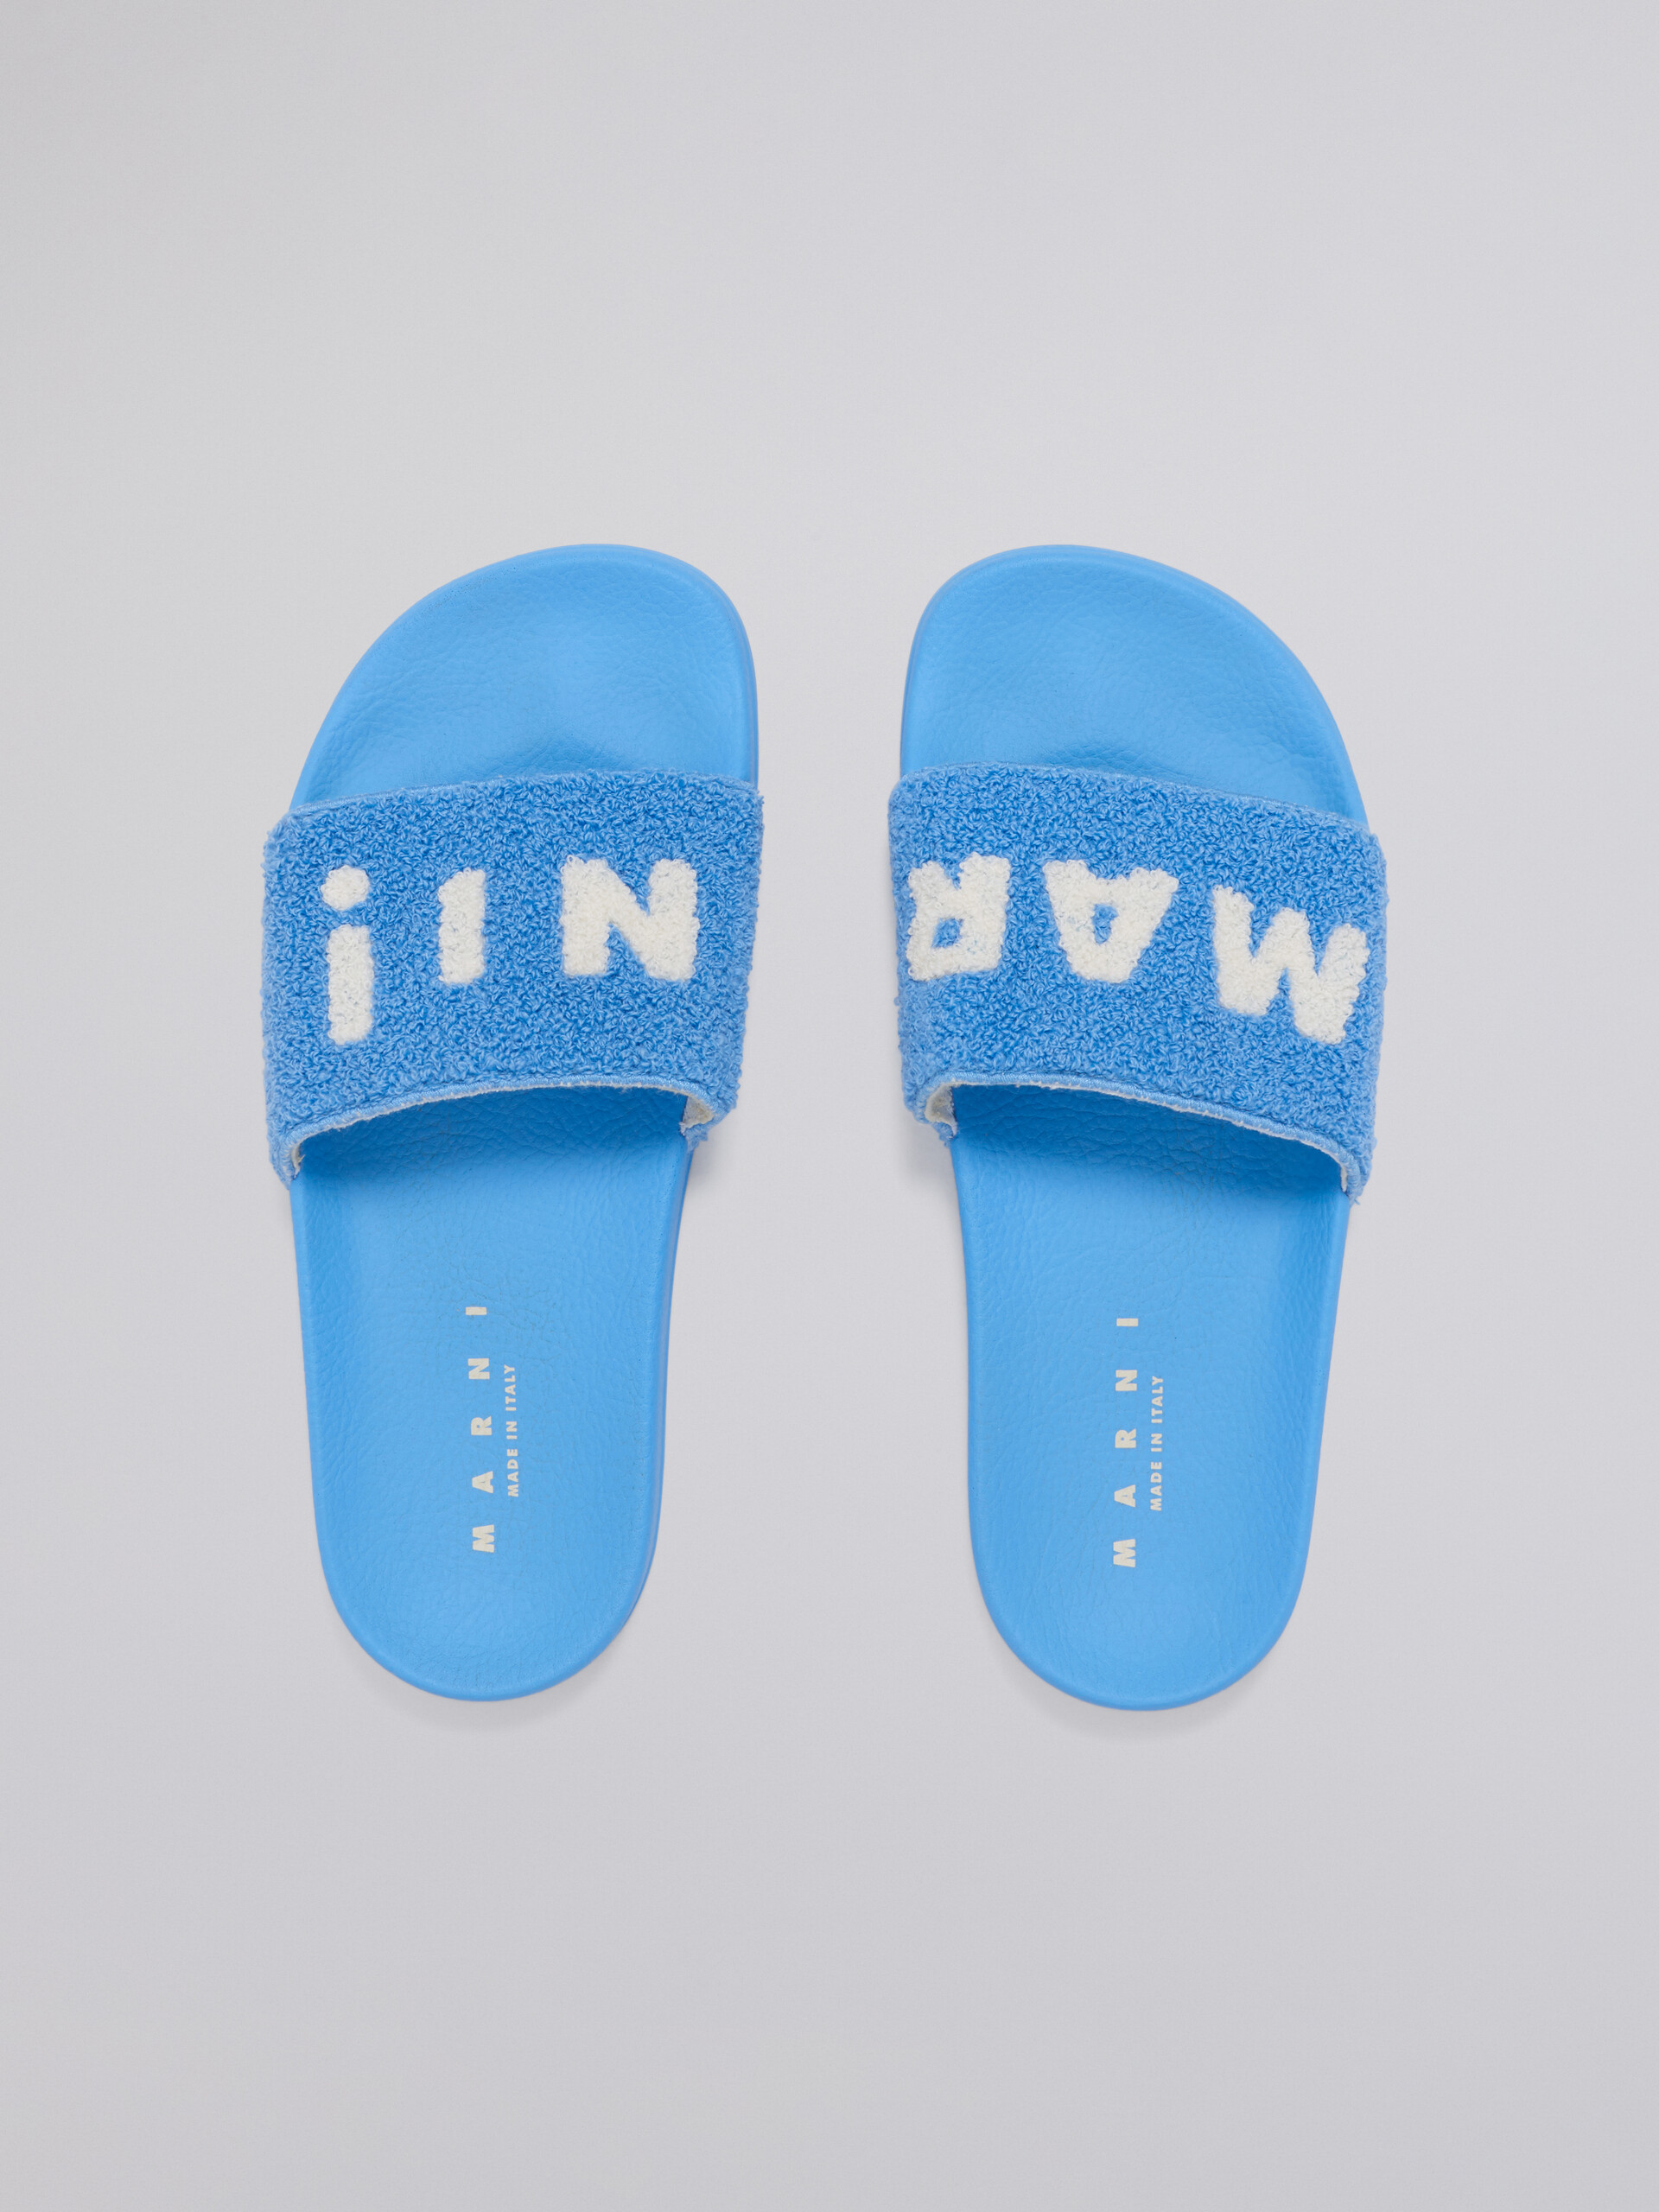 Rubber sandal with blue and white terry cloth upper - Sandals - Image 4